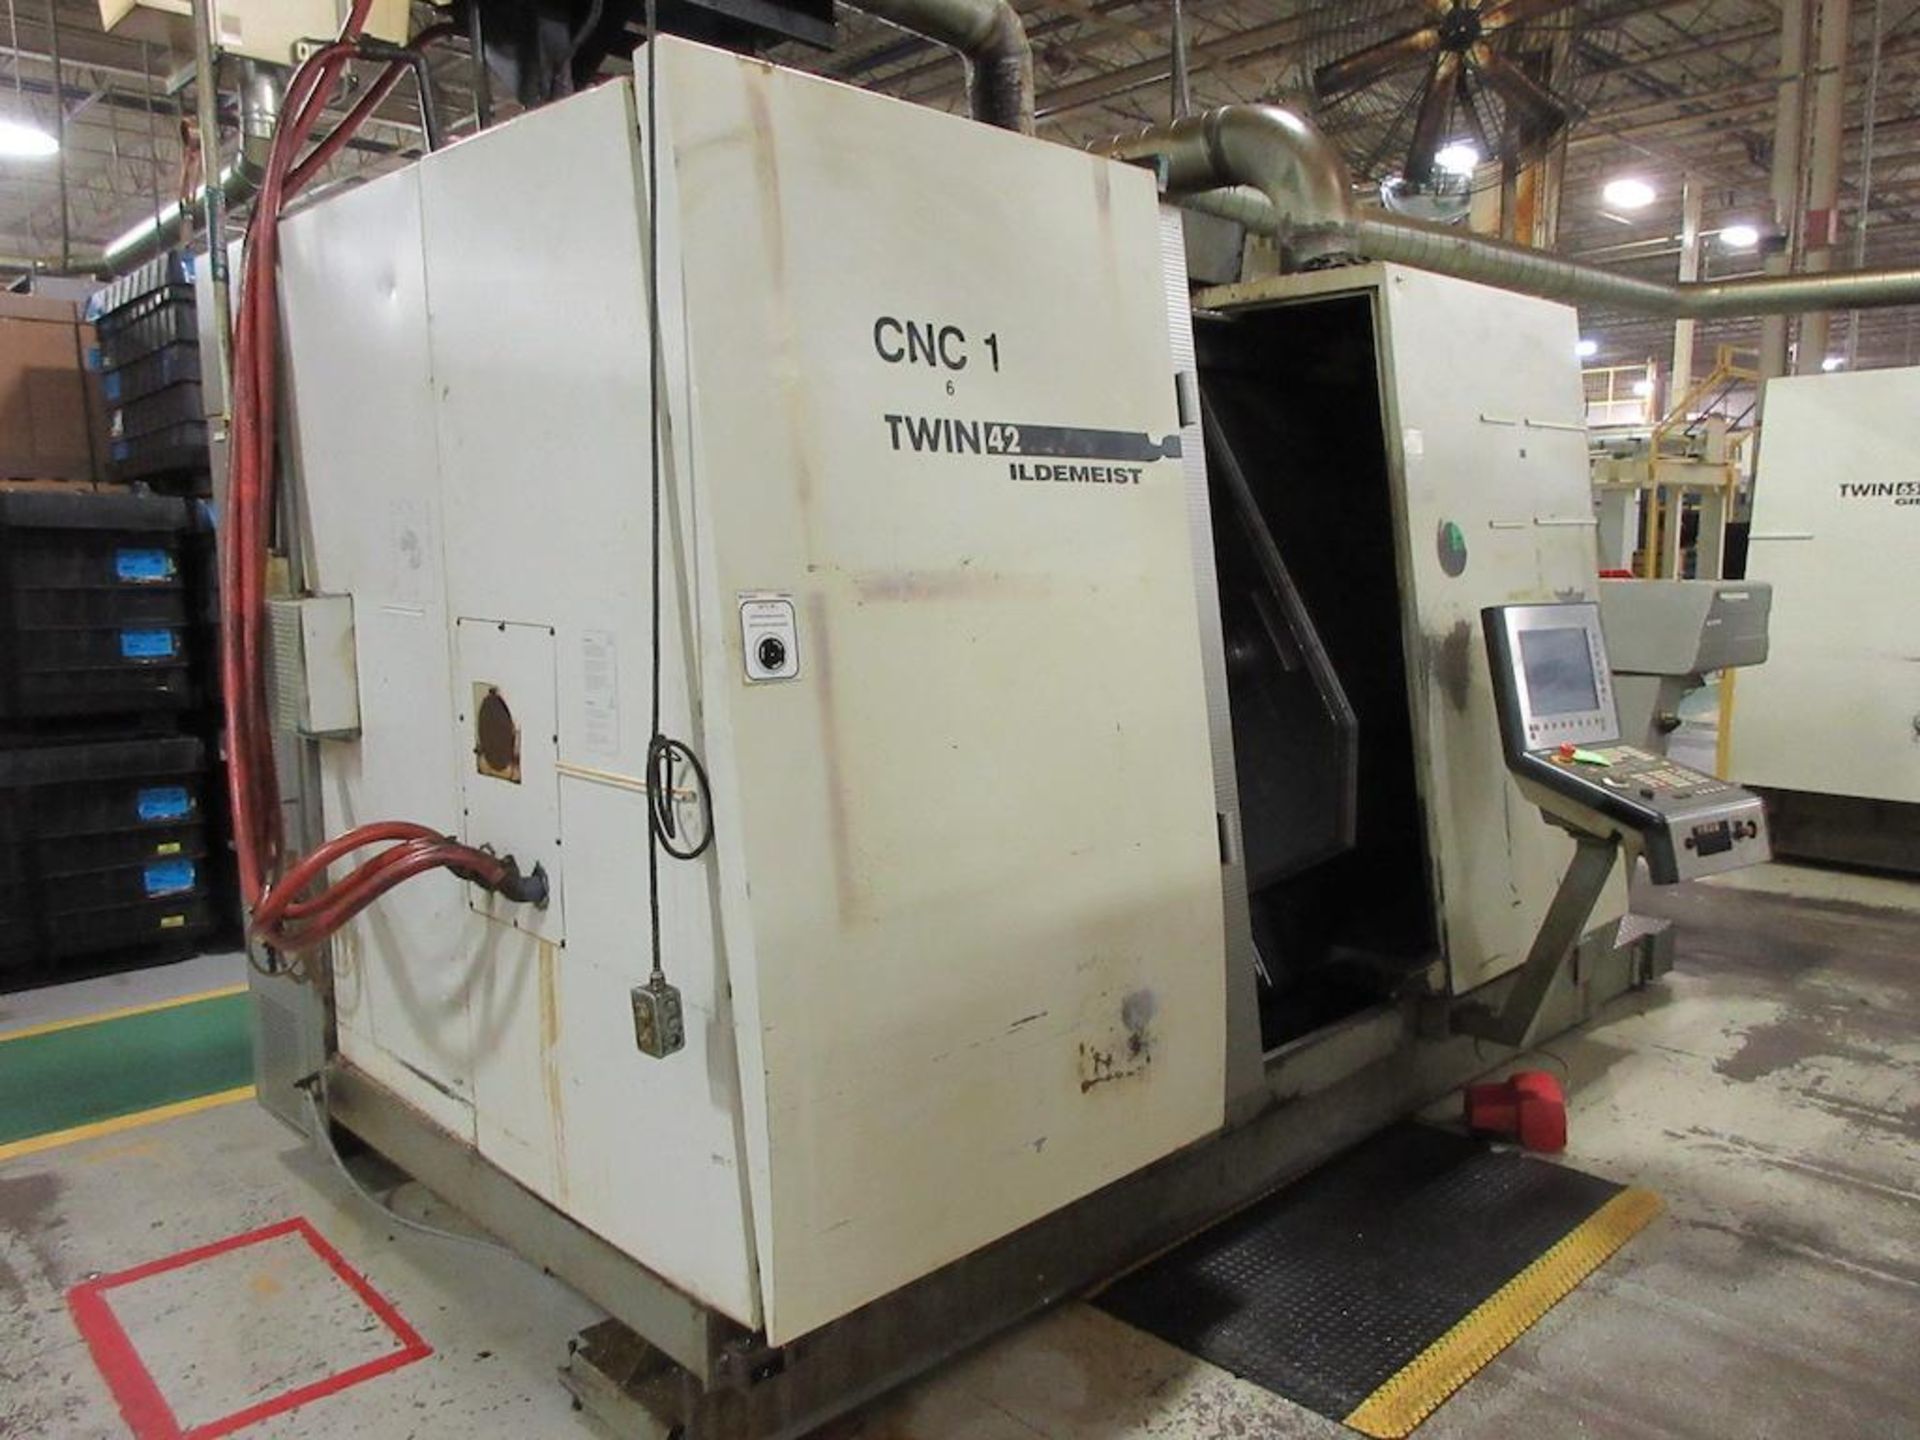 2006 DMG CNC Lathe, Model Twin 42, Twin Spindle, 4 Axis, CNC Control, B-Axis, Swing Diameter 5.7Ó, - Image 9 of 16